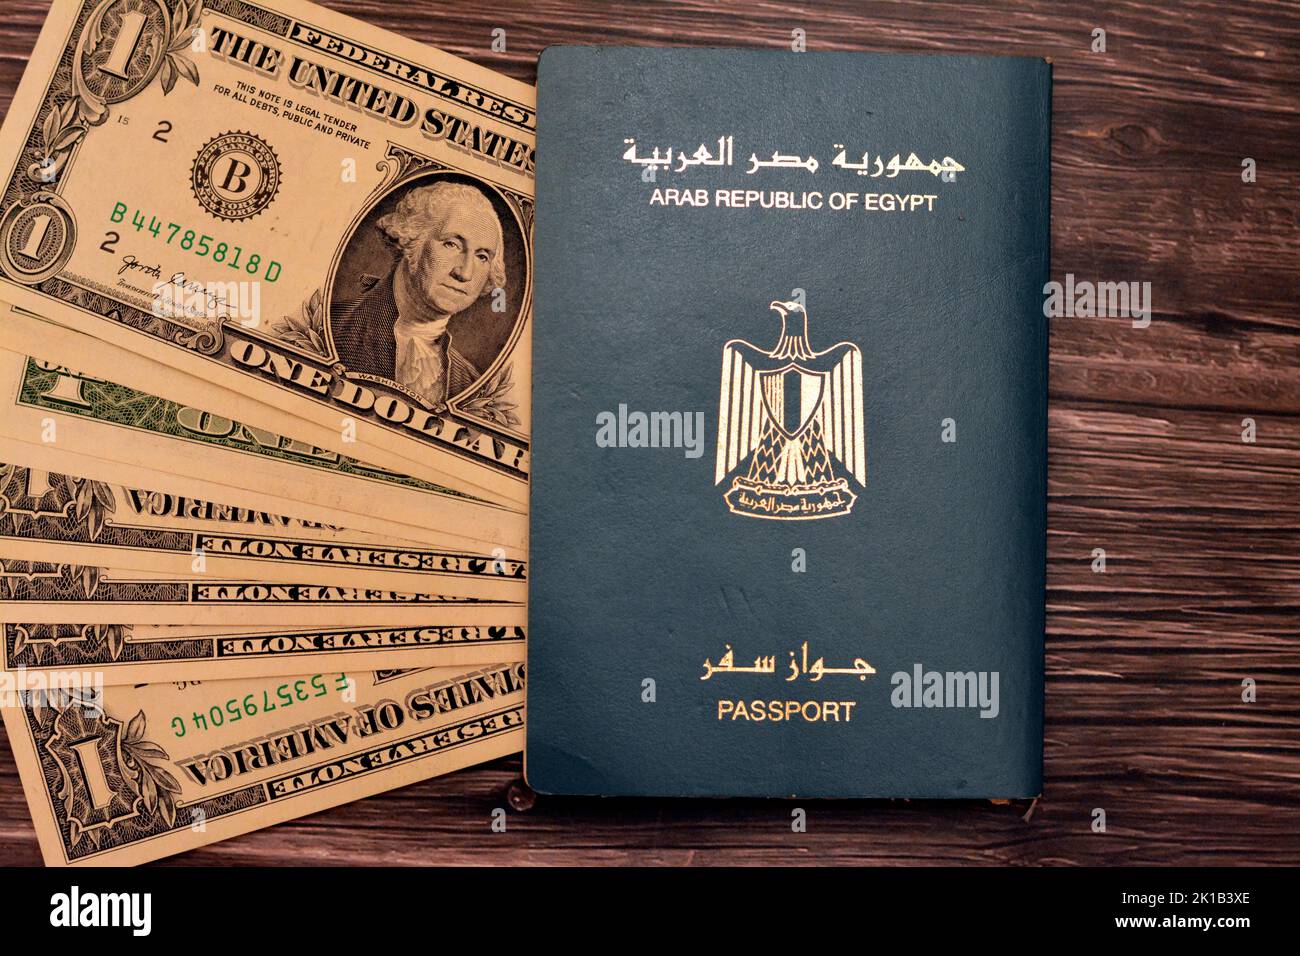 Egyptian passport with American dollars of 1 $ one United states money banknotes isolated on wooden background, Arab republic of Egypt's passport with Stock Photo